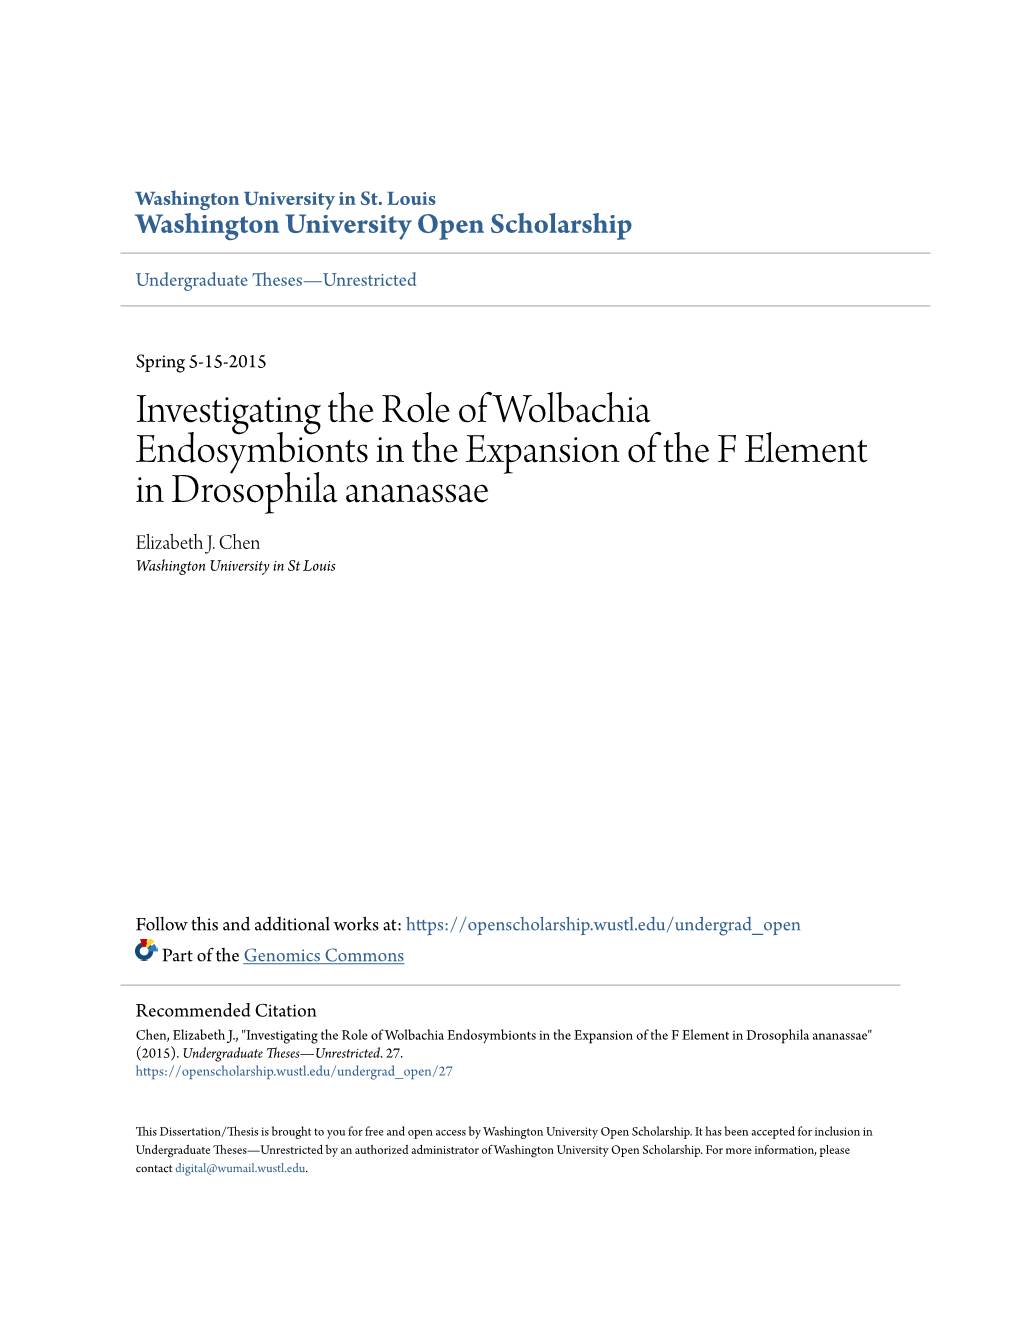 Investigating the Role of Wolbachia Endosymbionts in the Expansion of the F Element in Drosophila Ananassae Elizabeth J